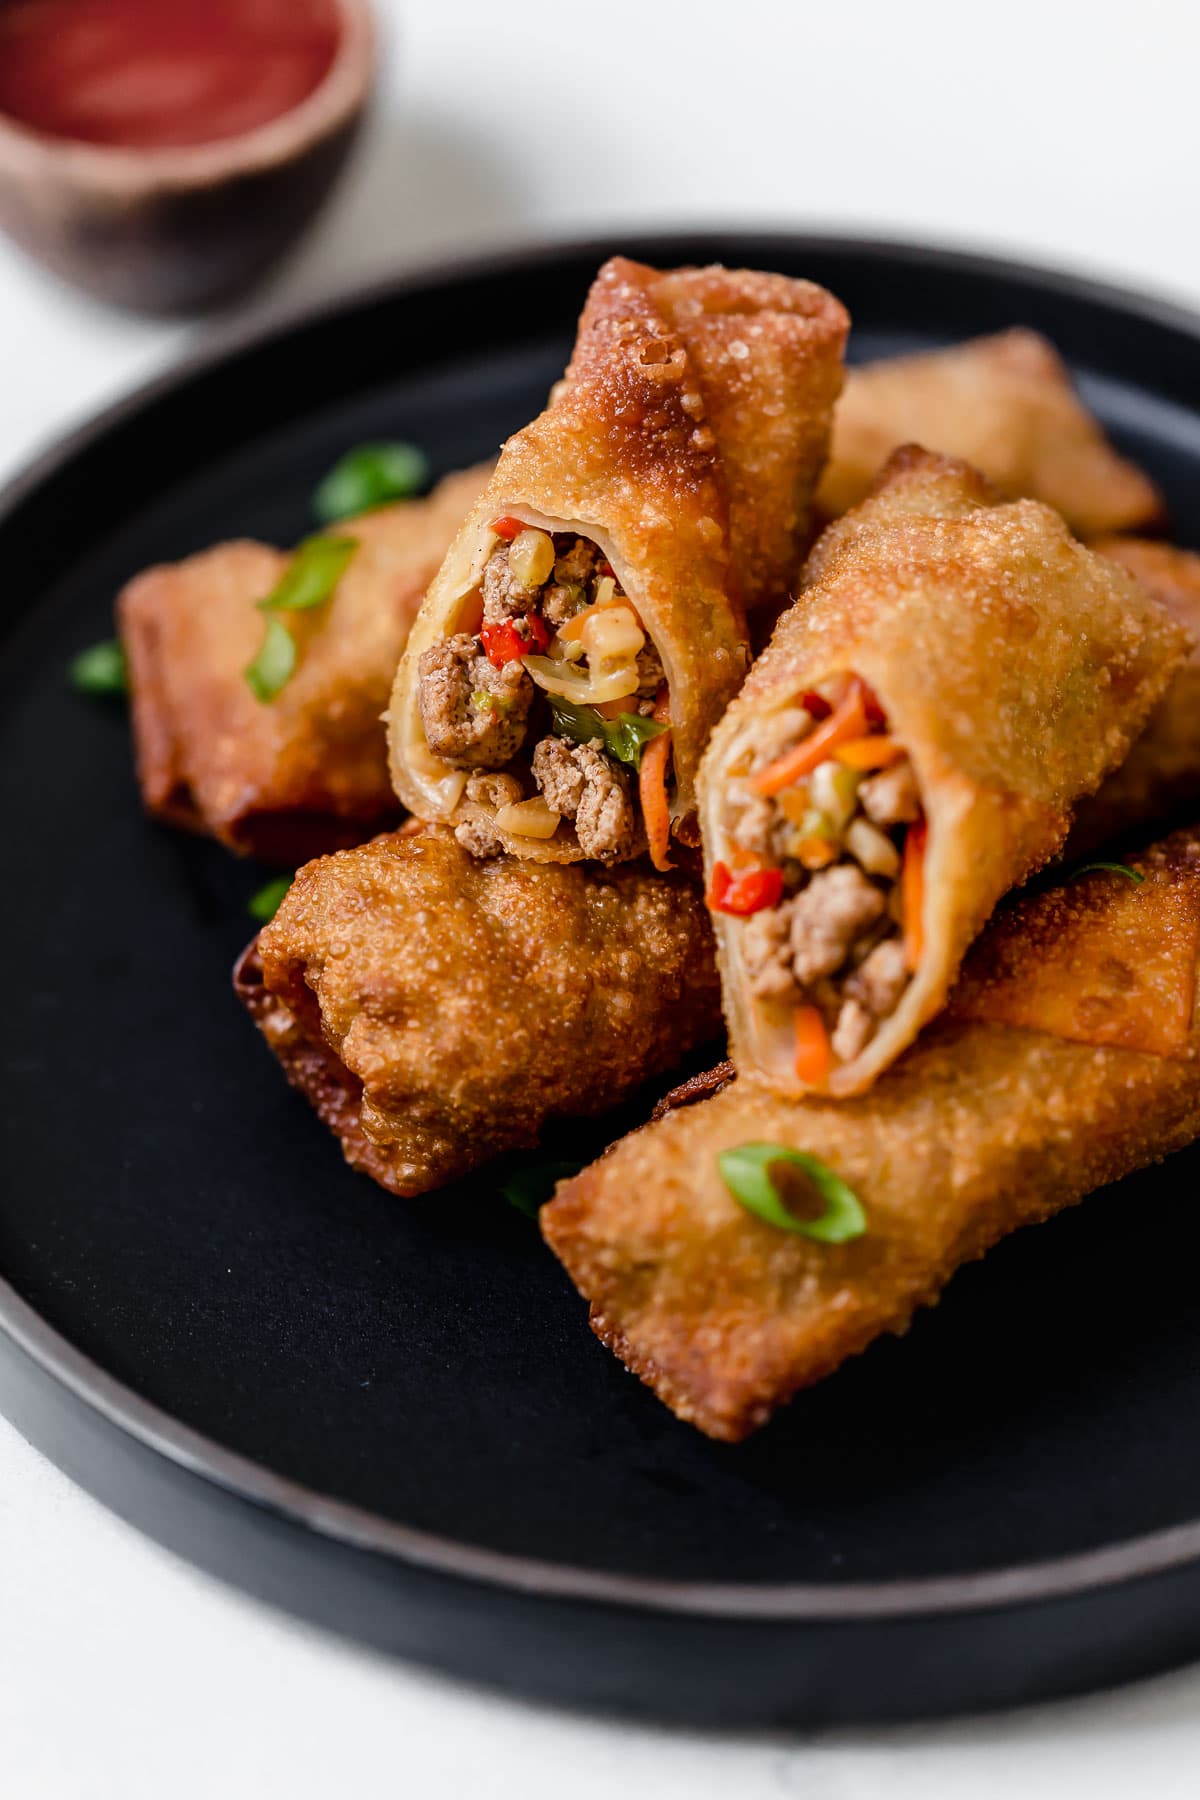 Egg Rolls Fried or Baked - Cooking Classy